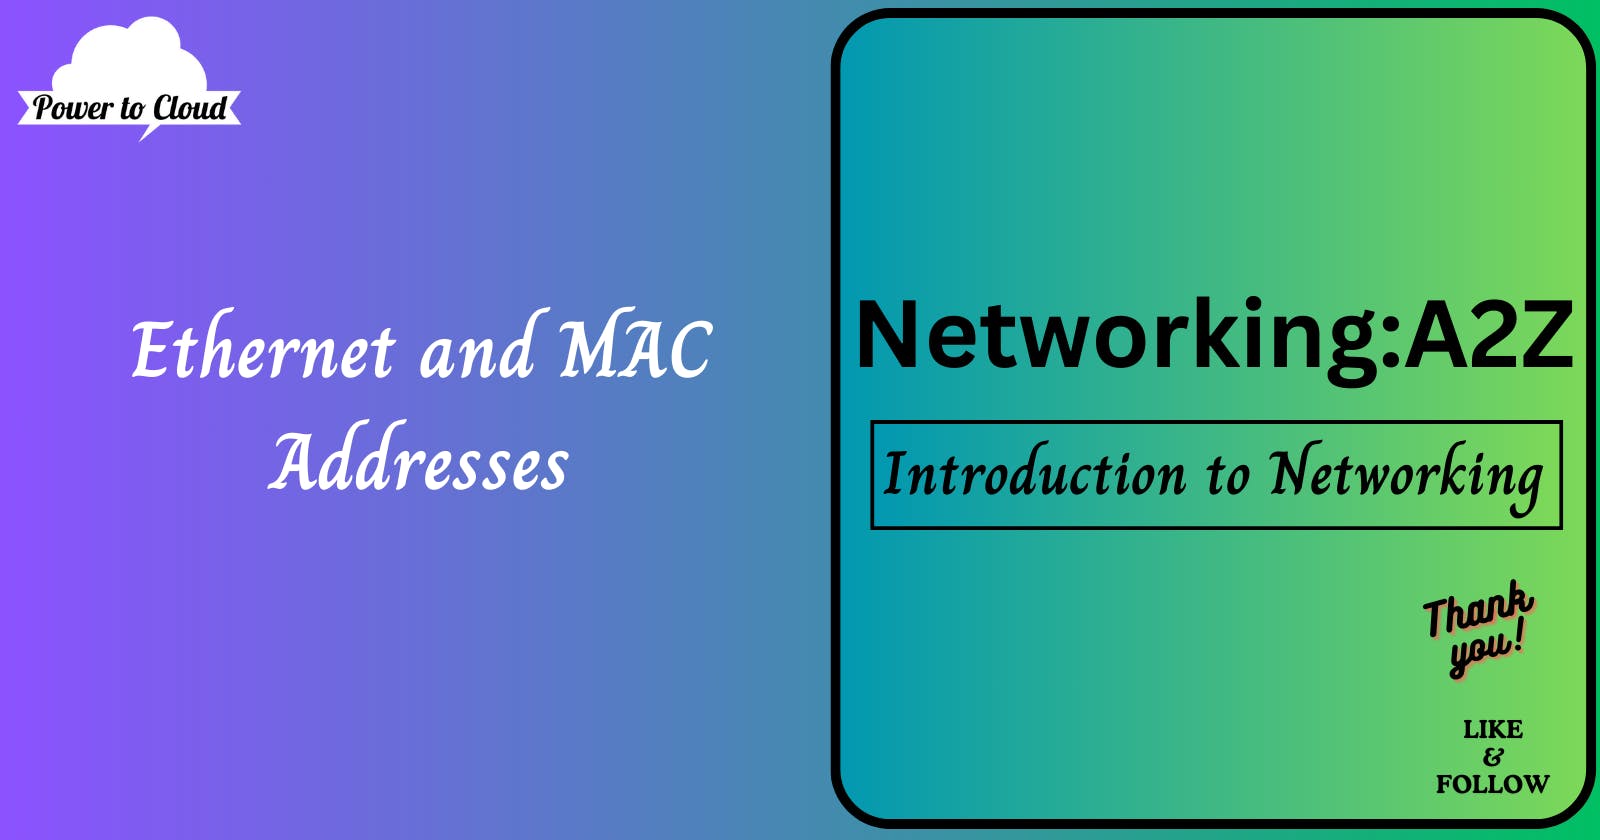 1.6 Deep Dive into Ethernet and MAC Addresses